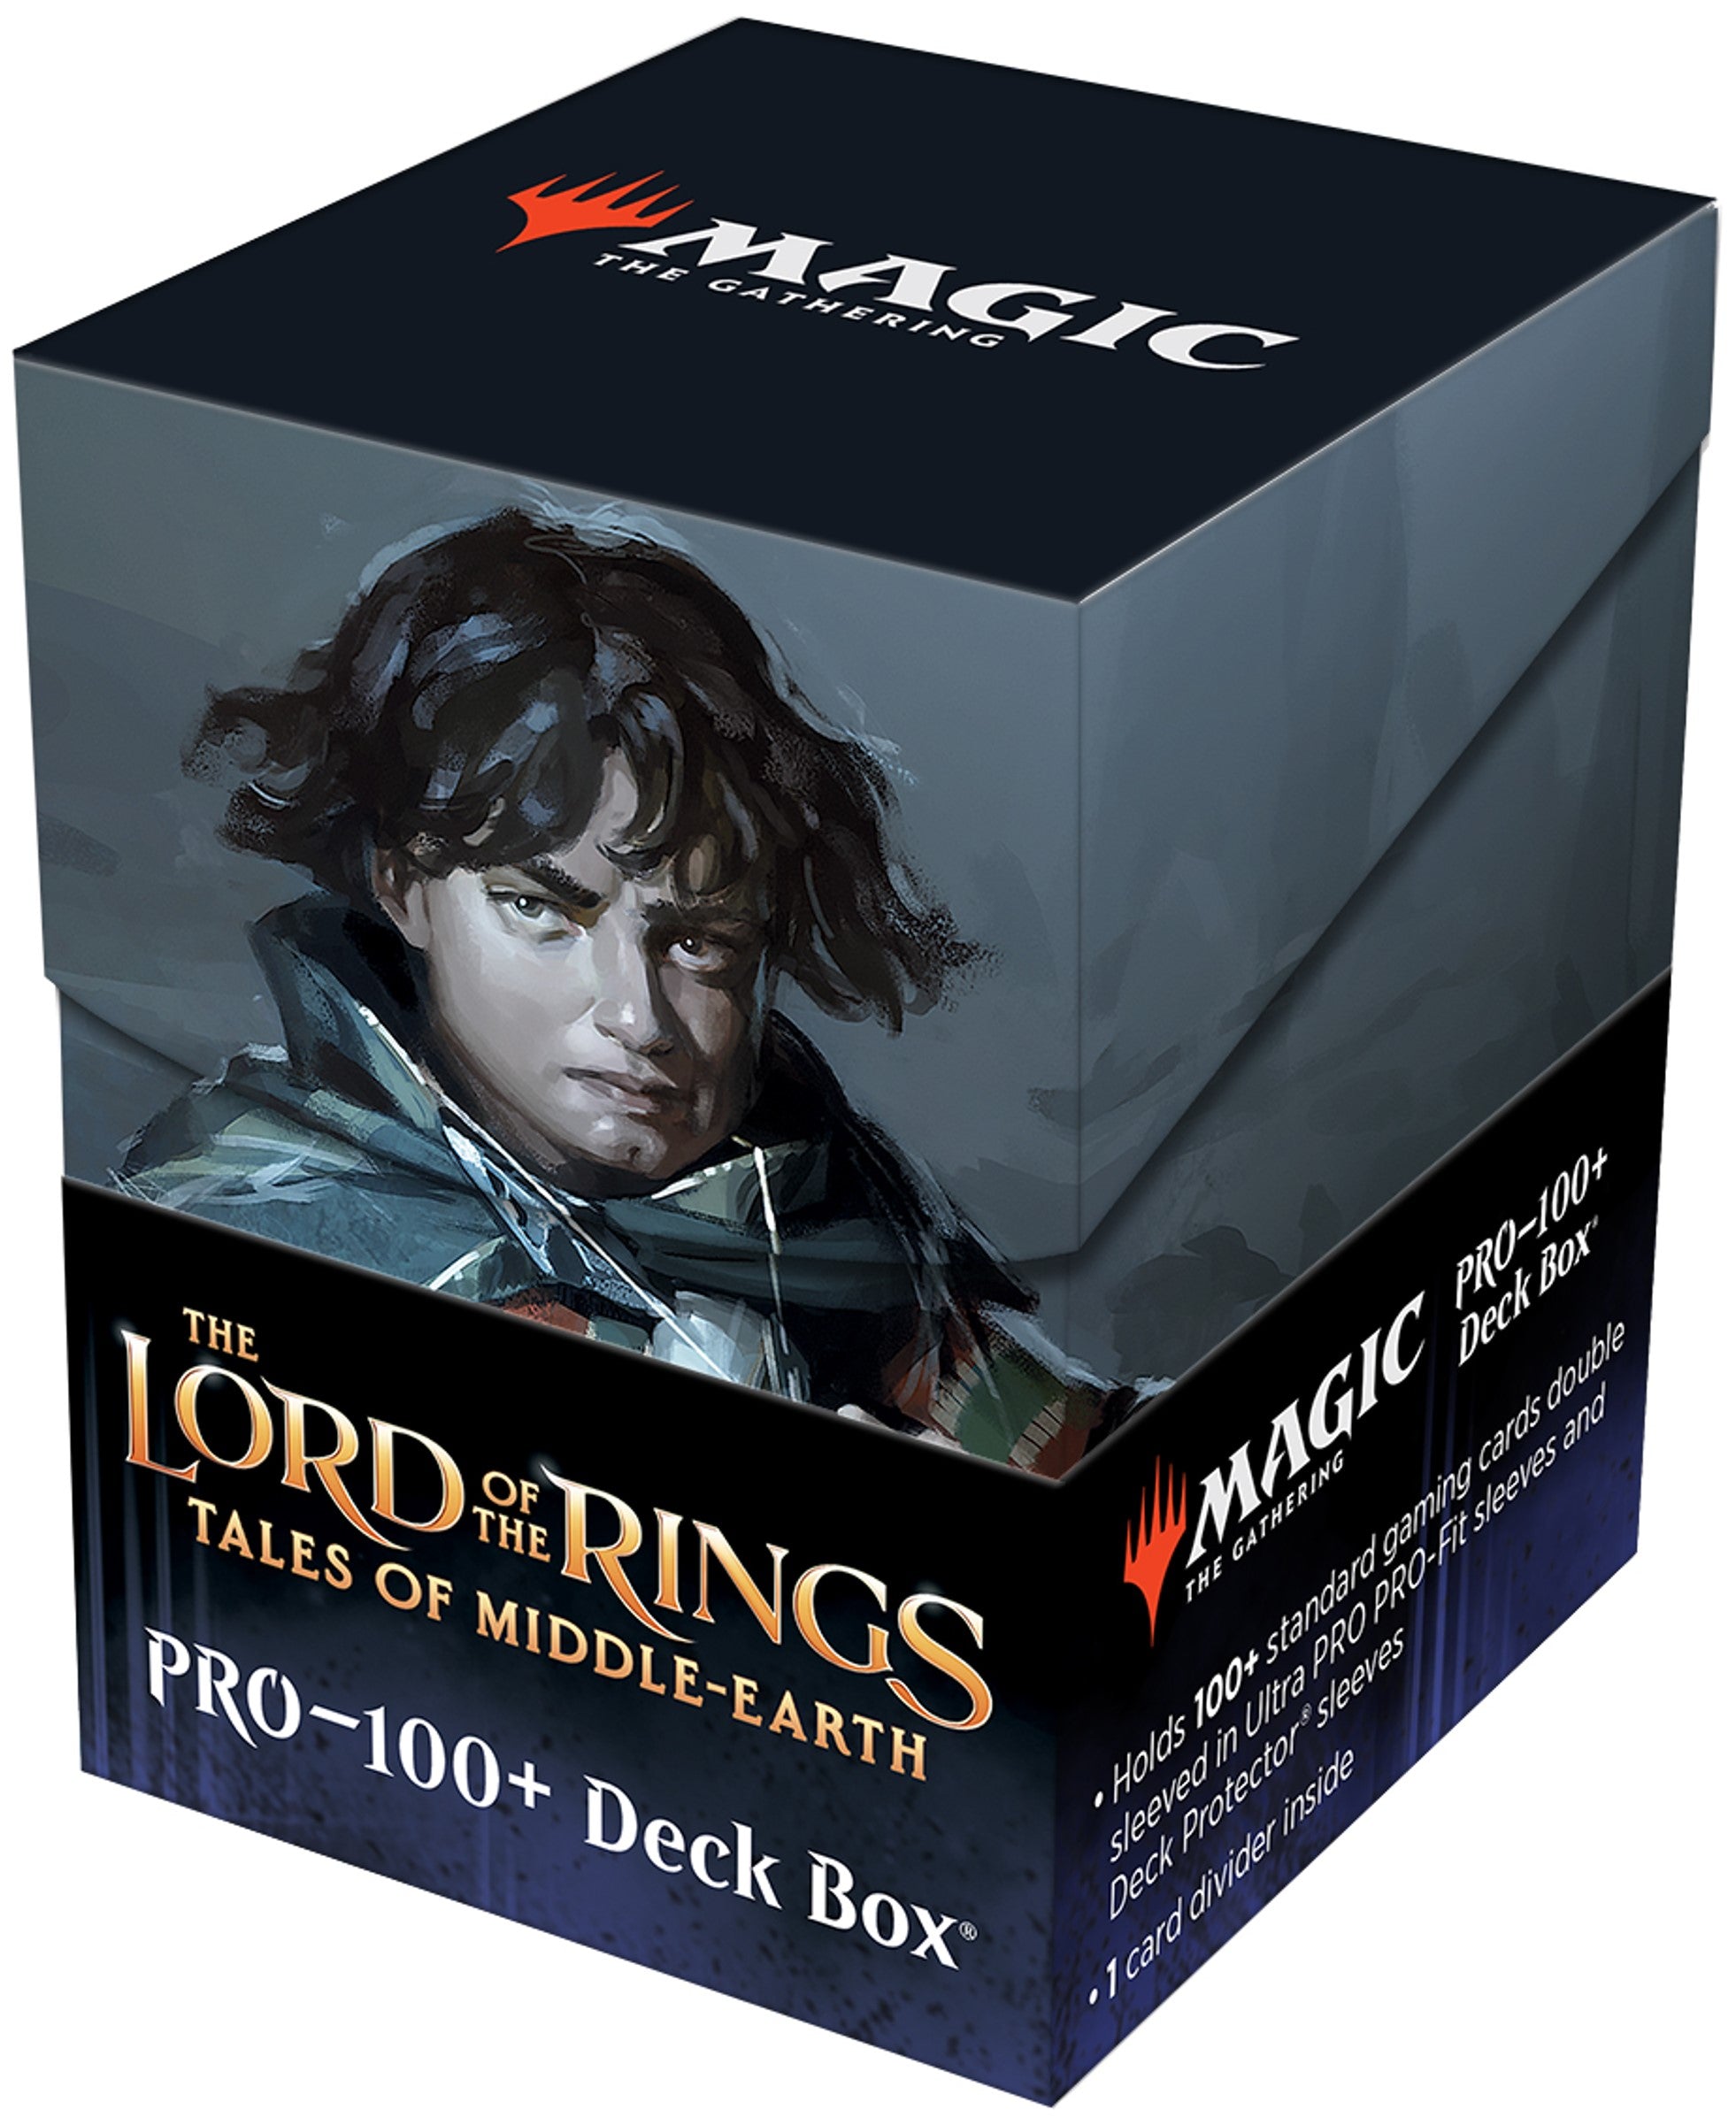 Pro-100+ Deck Box Lord of the Rings: Frodo | North of Exile Games